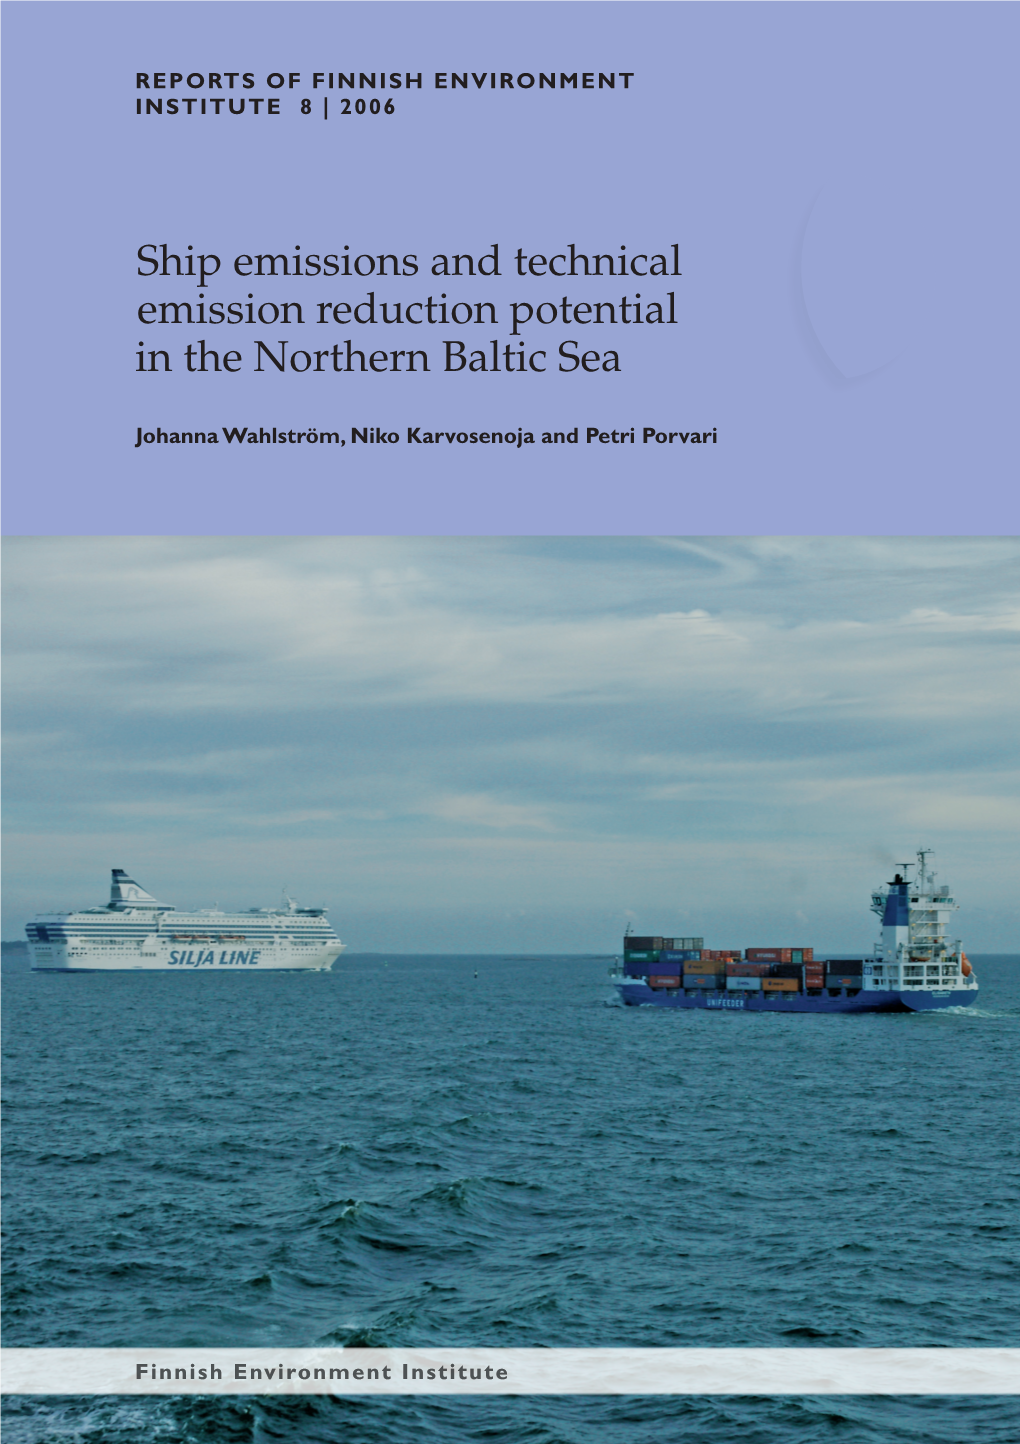 Ship Emissions and Technical Emission Reduction Potential in the Northern Baltic Sea